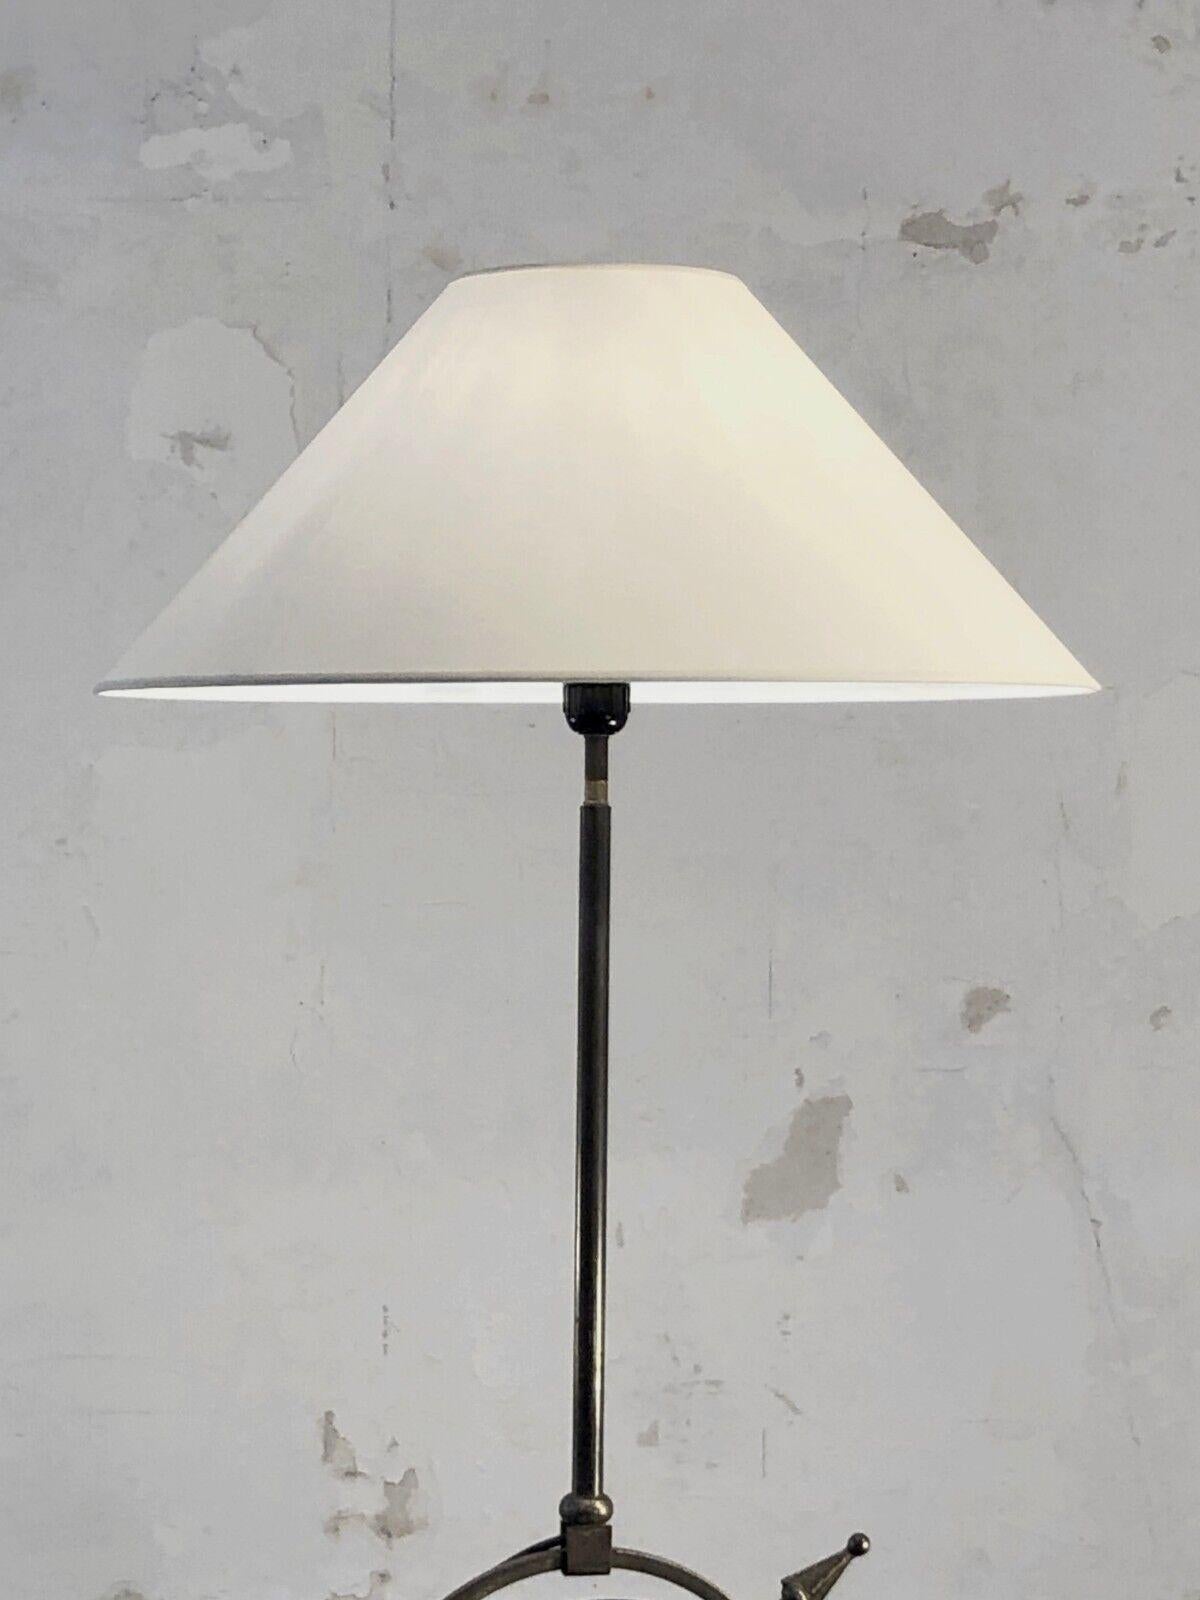 Mid-20th Century A BRUTALIST NEO-CLASSIC Wrought Iron FLOOR LAMP by J-P. RYCKAERT, France 1960 For Sale